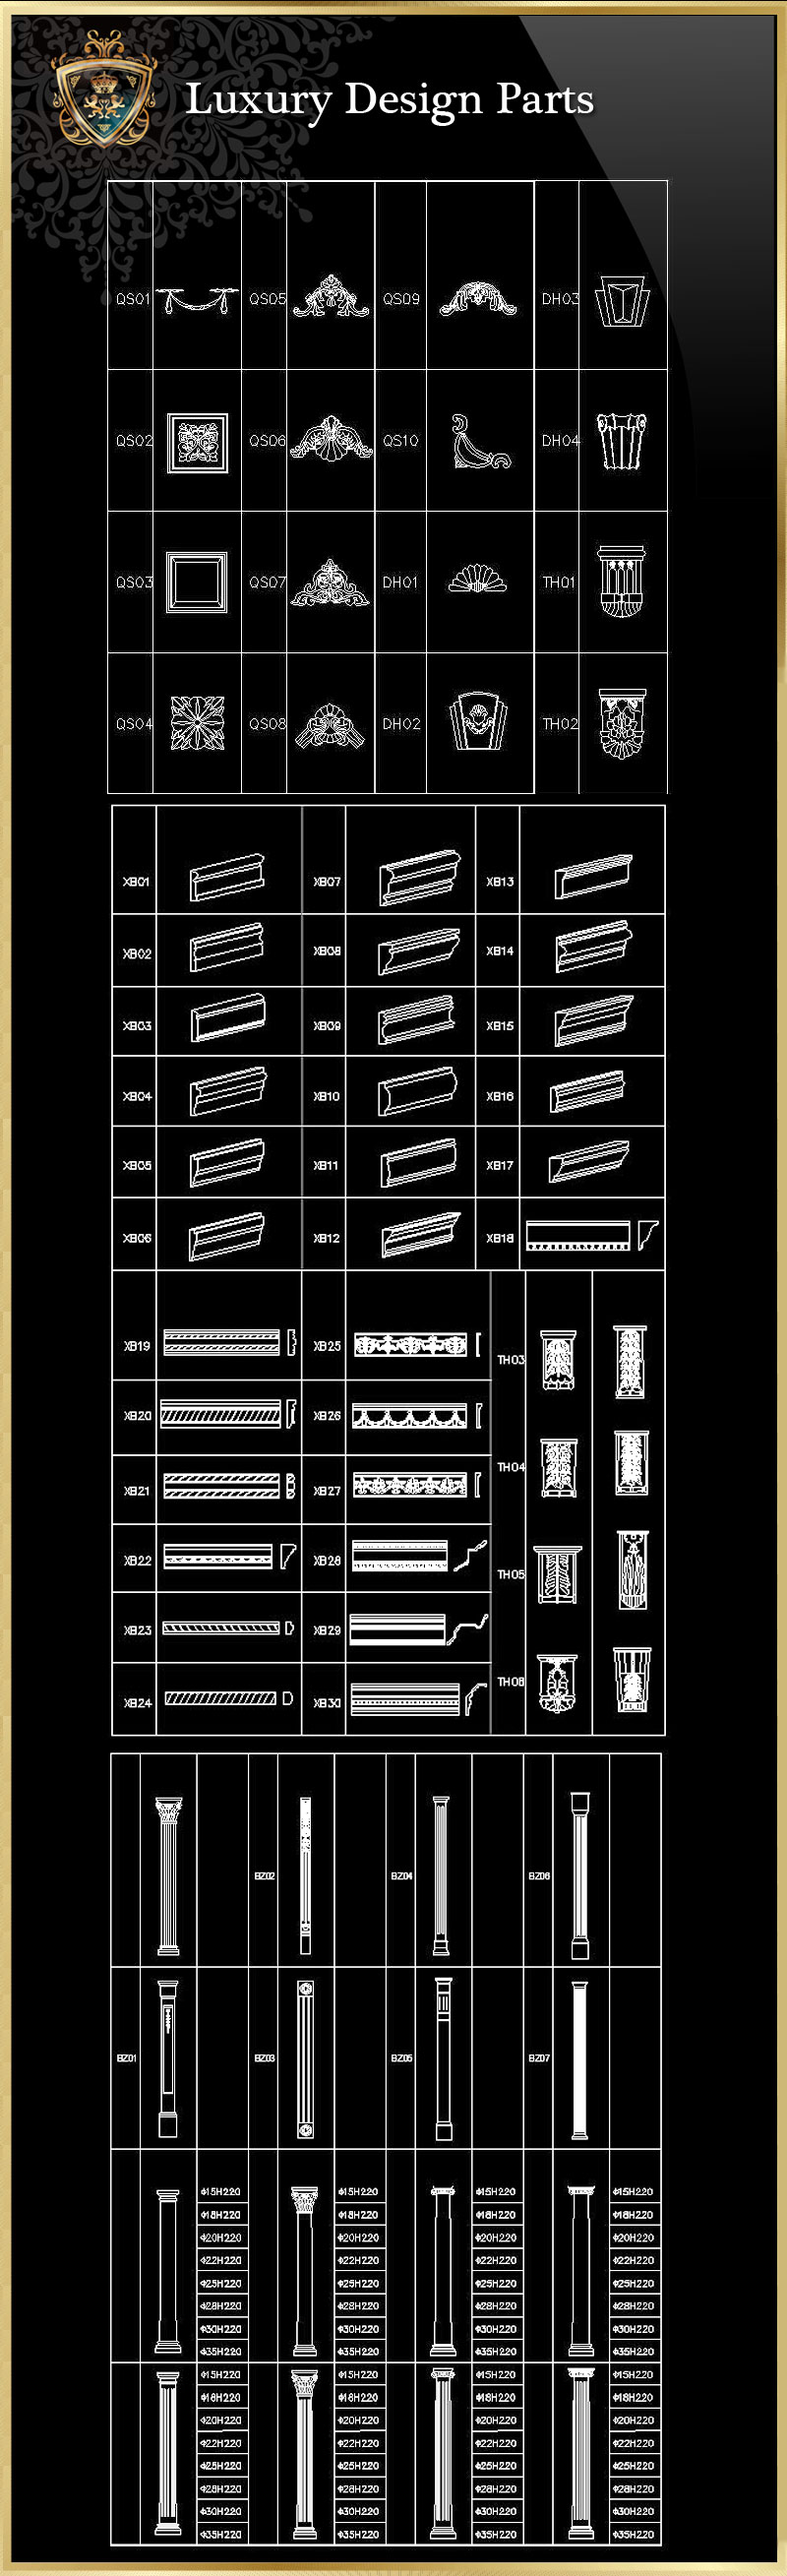 ★【Luxury Design Parts 6】Download Luxury Architectural Design CAD Drawings--Over 20000+ High quality CAD Blocks and Drawings Download!